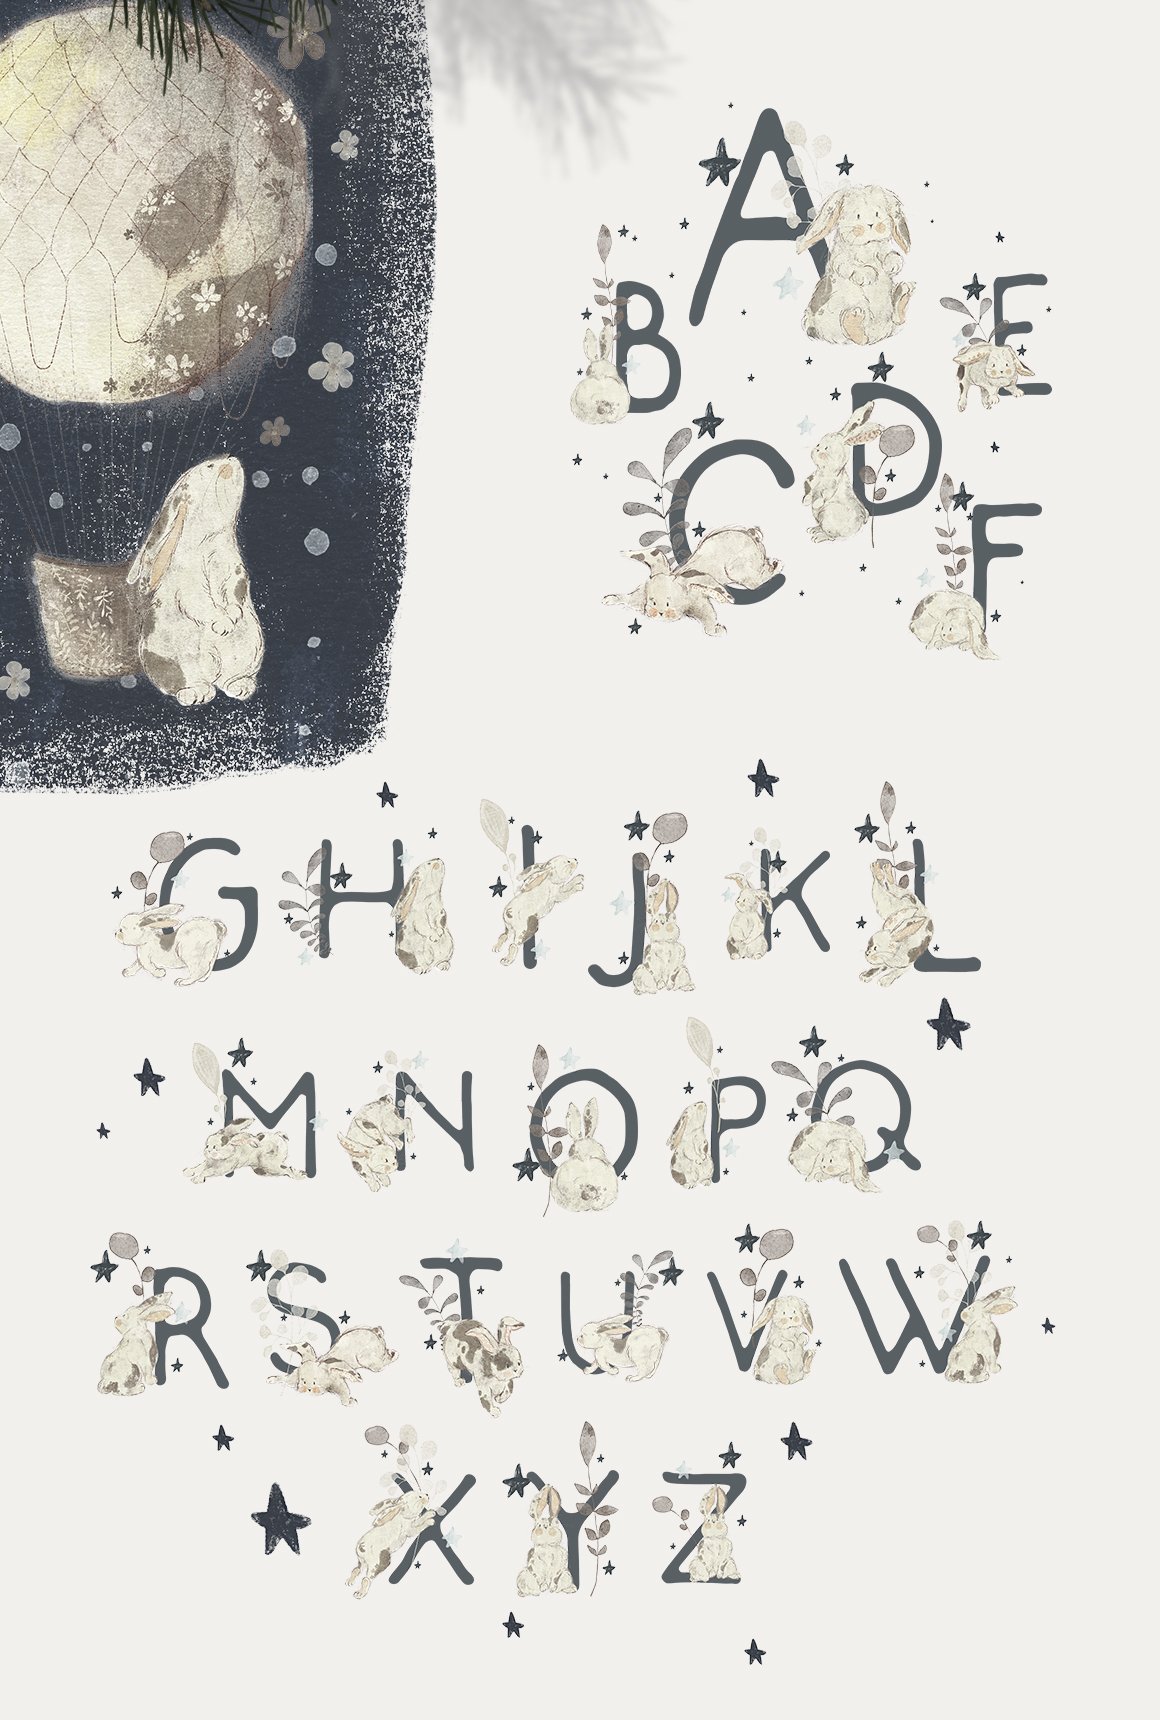 A wonderful alphabet and more with patterns.